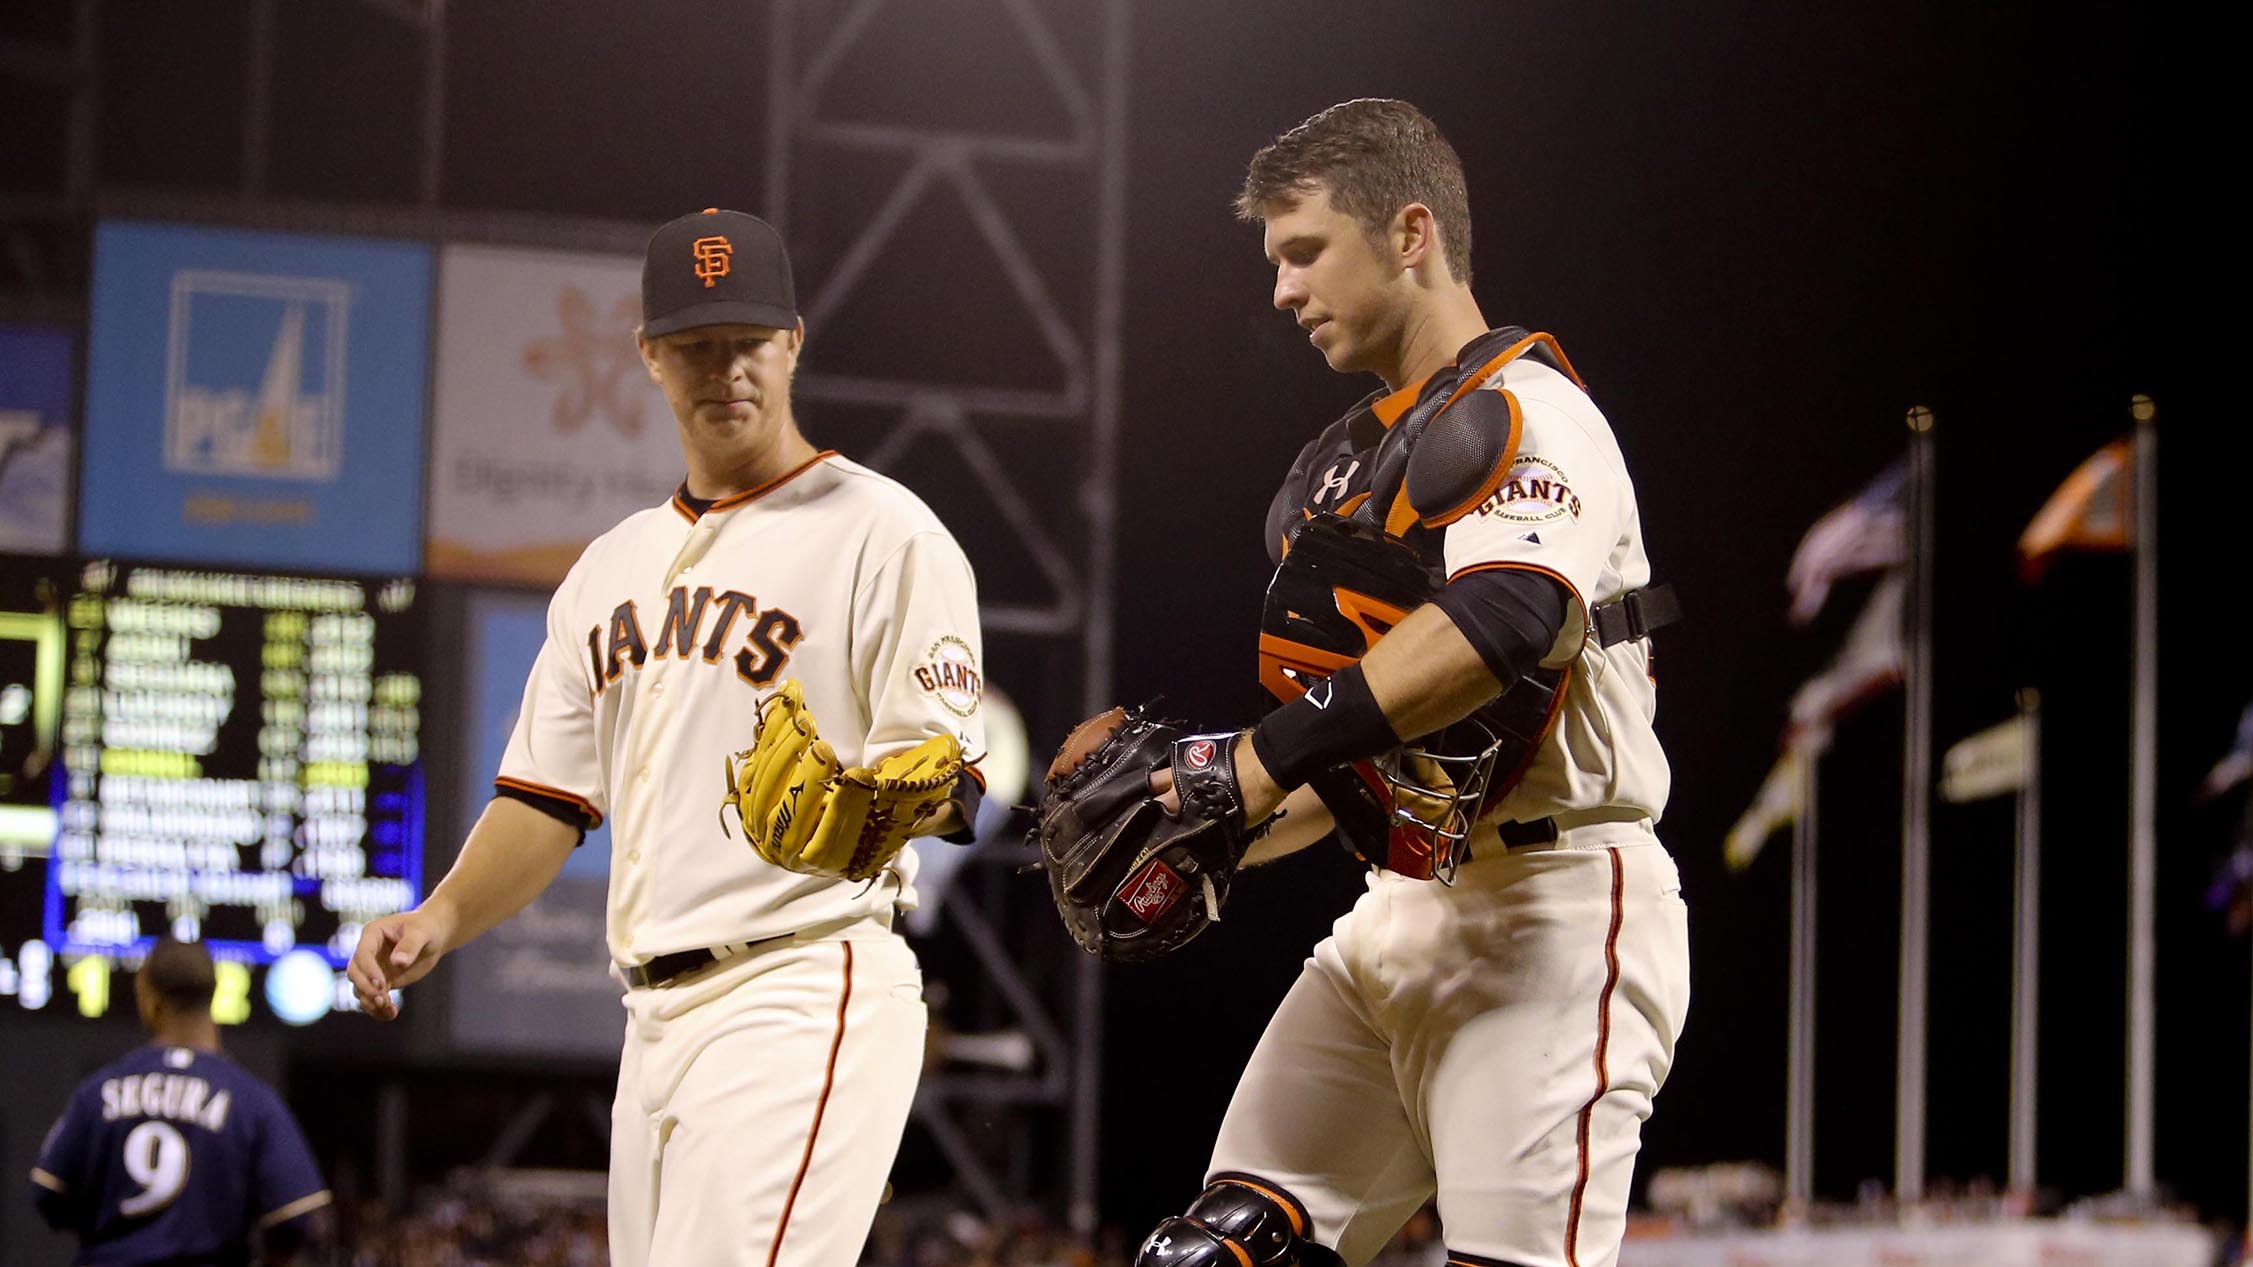 Sports and Spirituality: Matt Cain: Together we are Giantand Perfect.